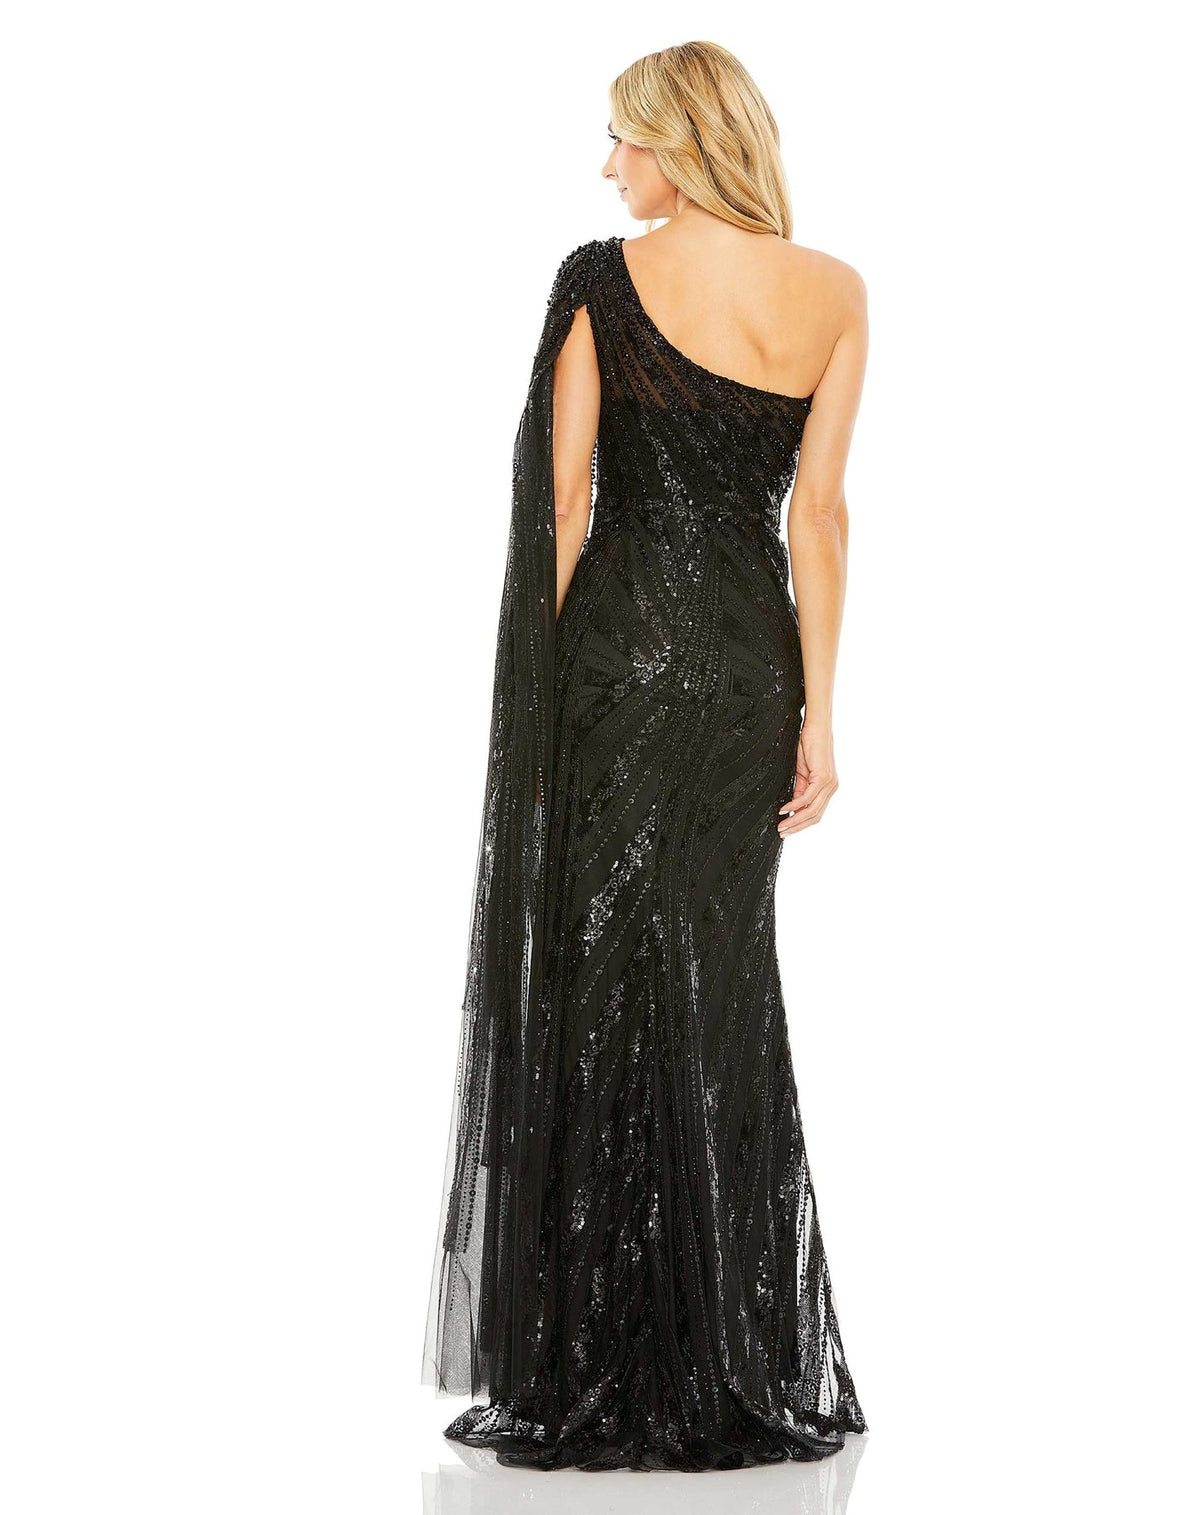 Mac Duggal Style #20528 One shoulder cap sleeve embellished gown - Black Sequin back view